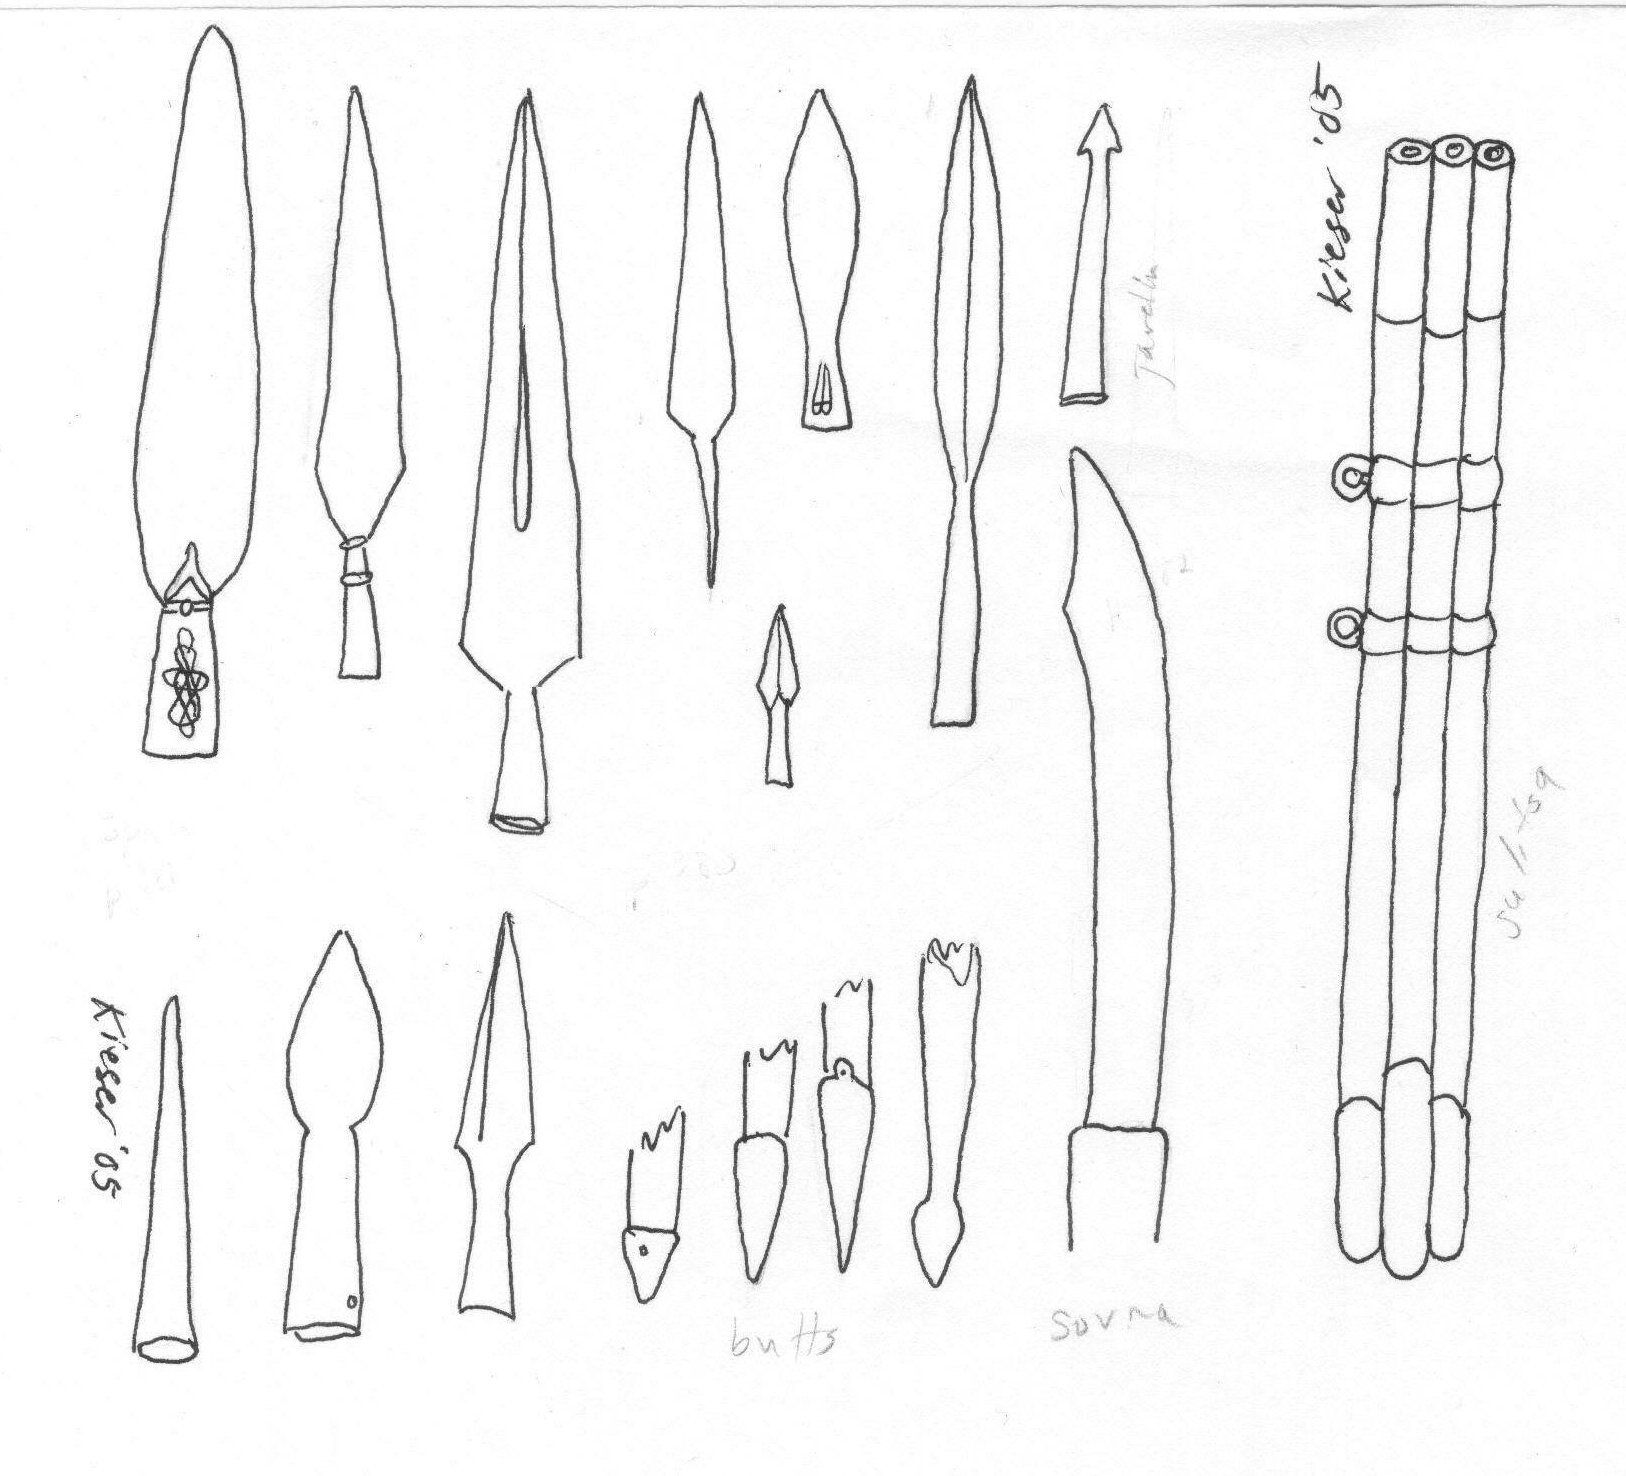 Spears and Javelins